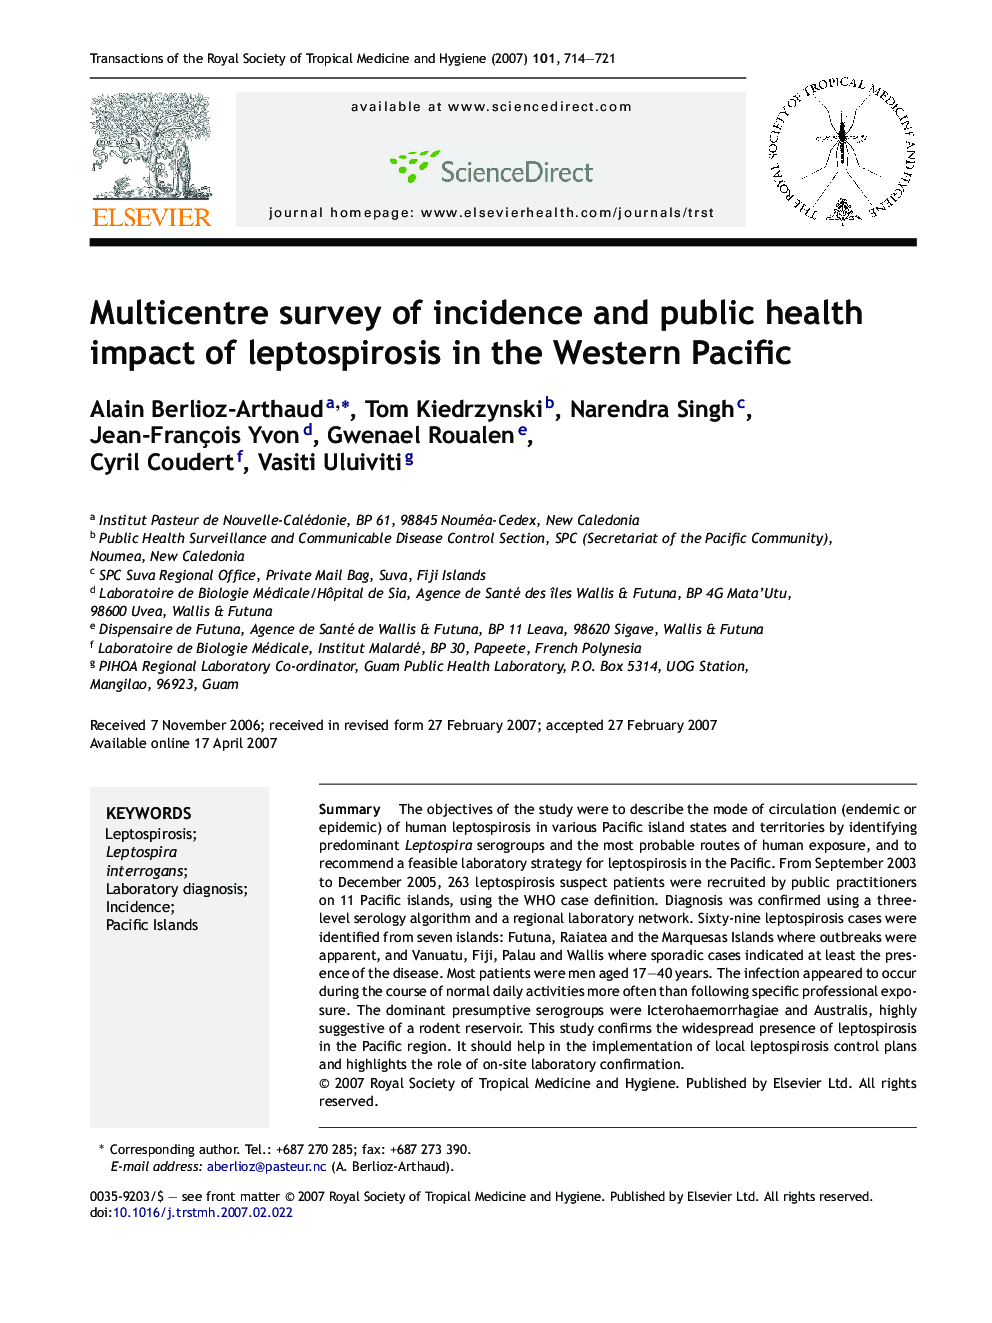 Multicentre survey of incidence and public health impact of leptospirosis in the Western Pacific